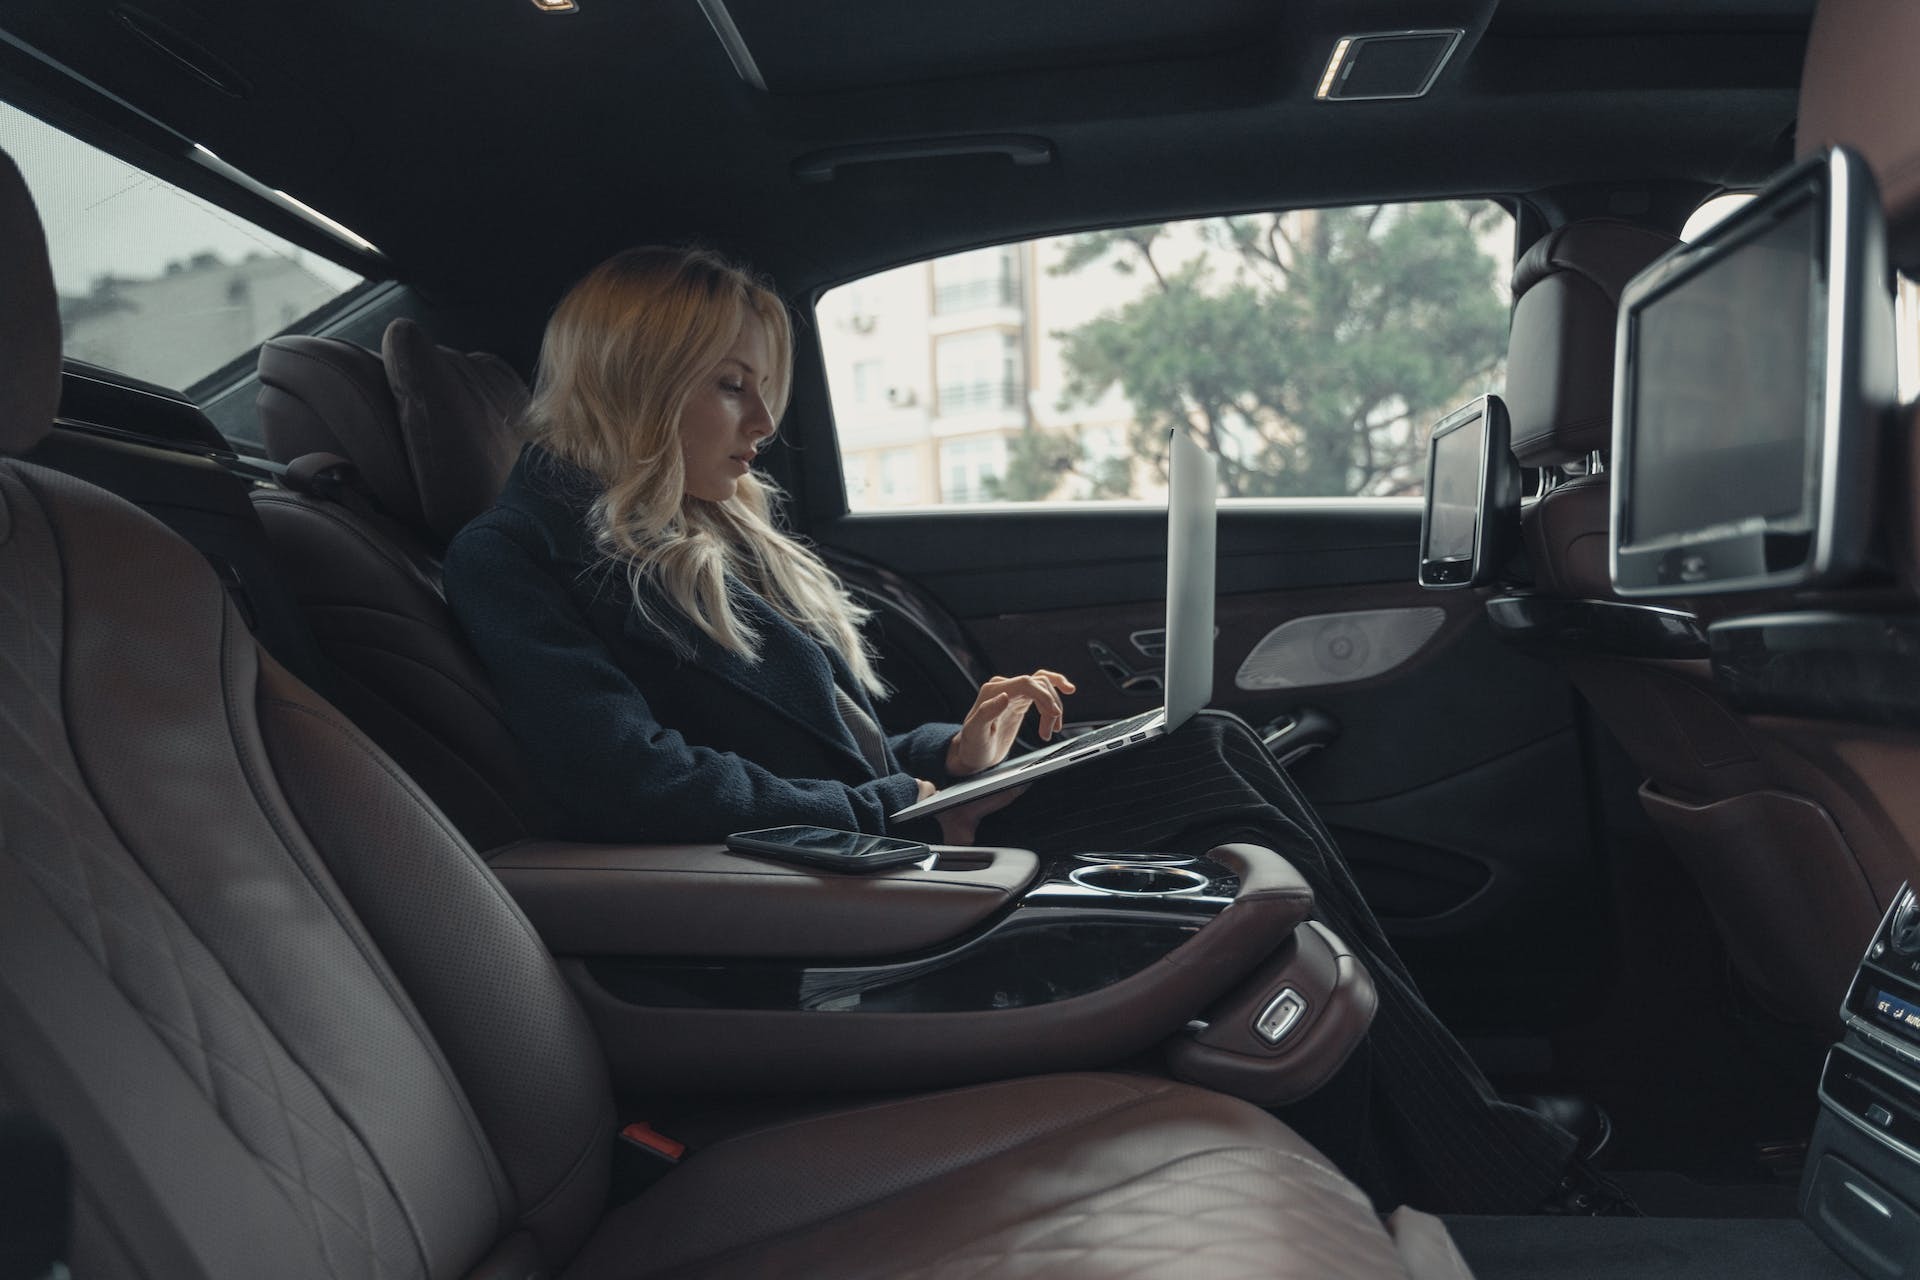 Blonde woman working on a laptop in the back of a taxi